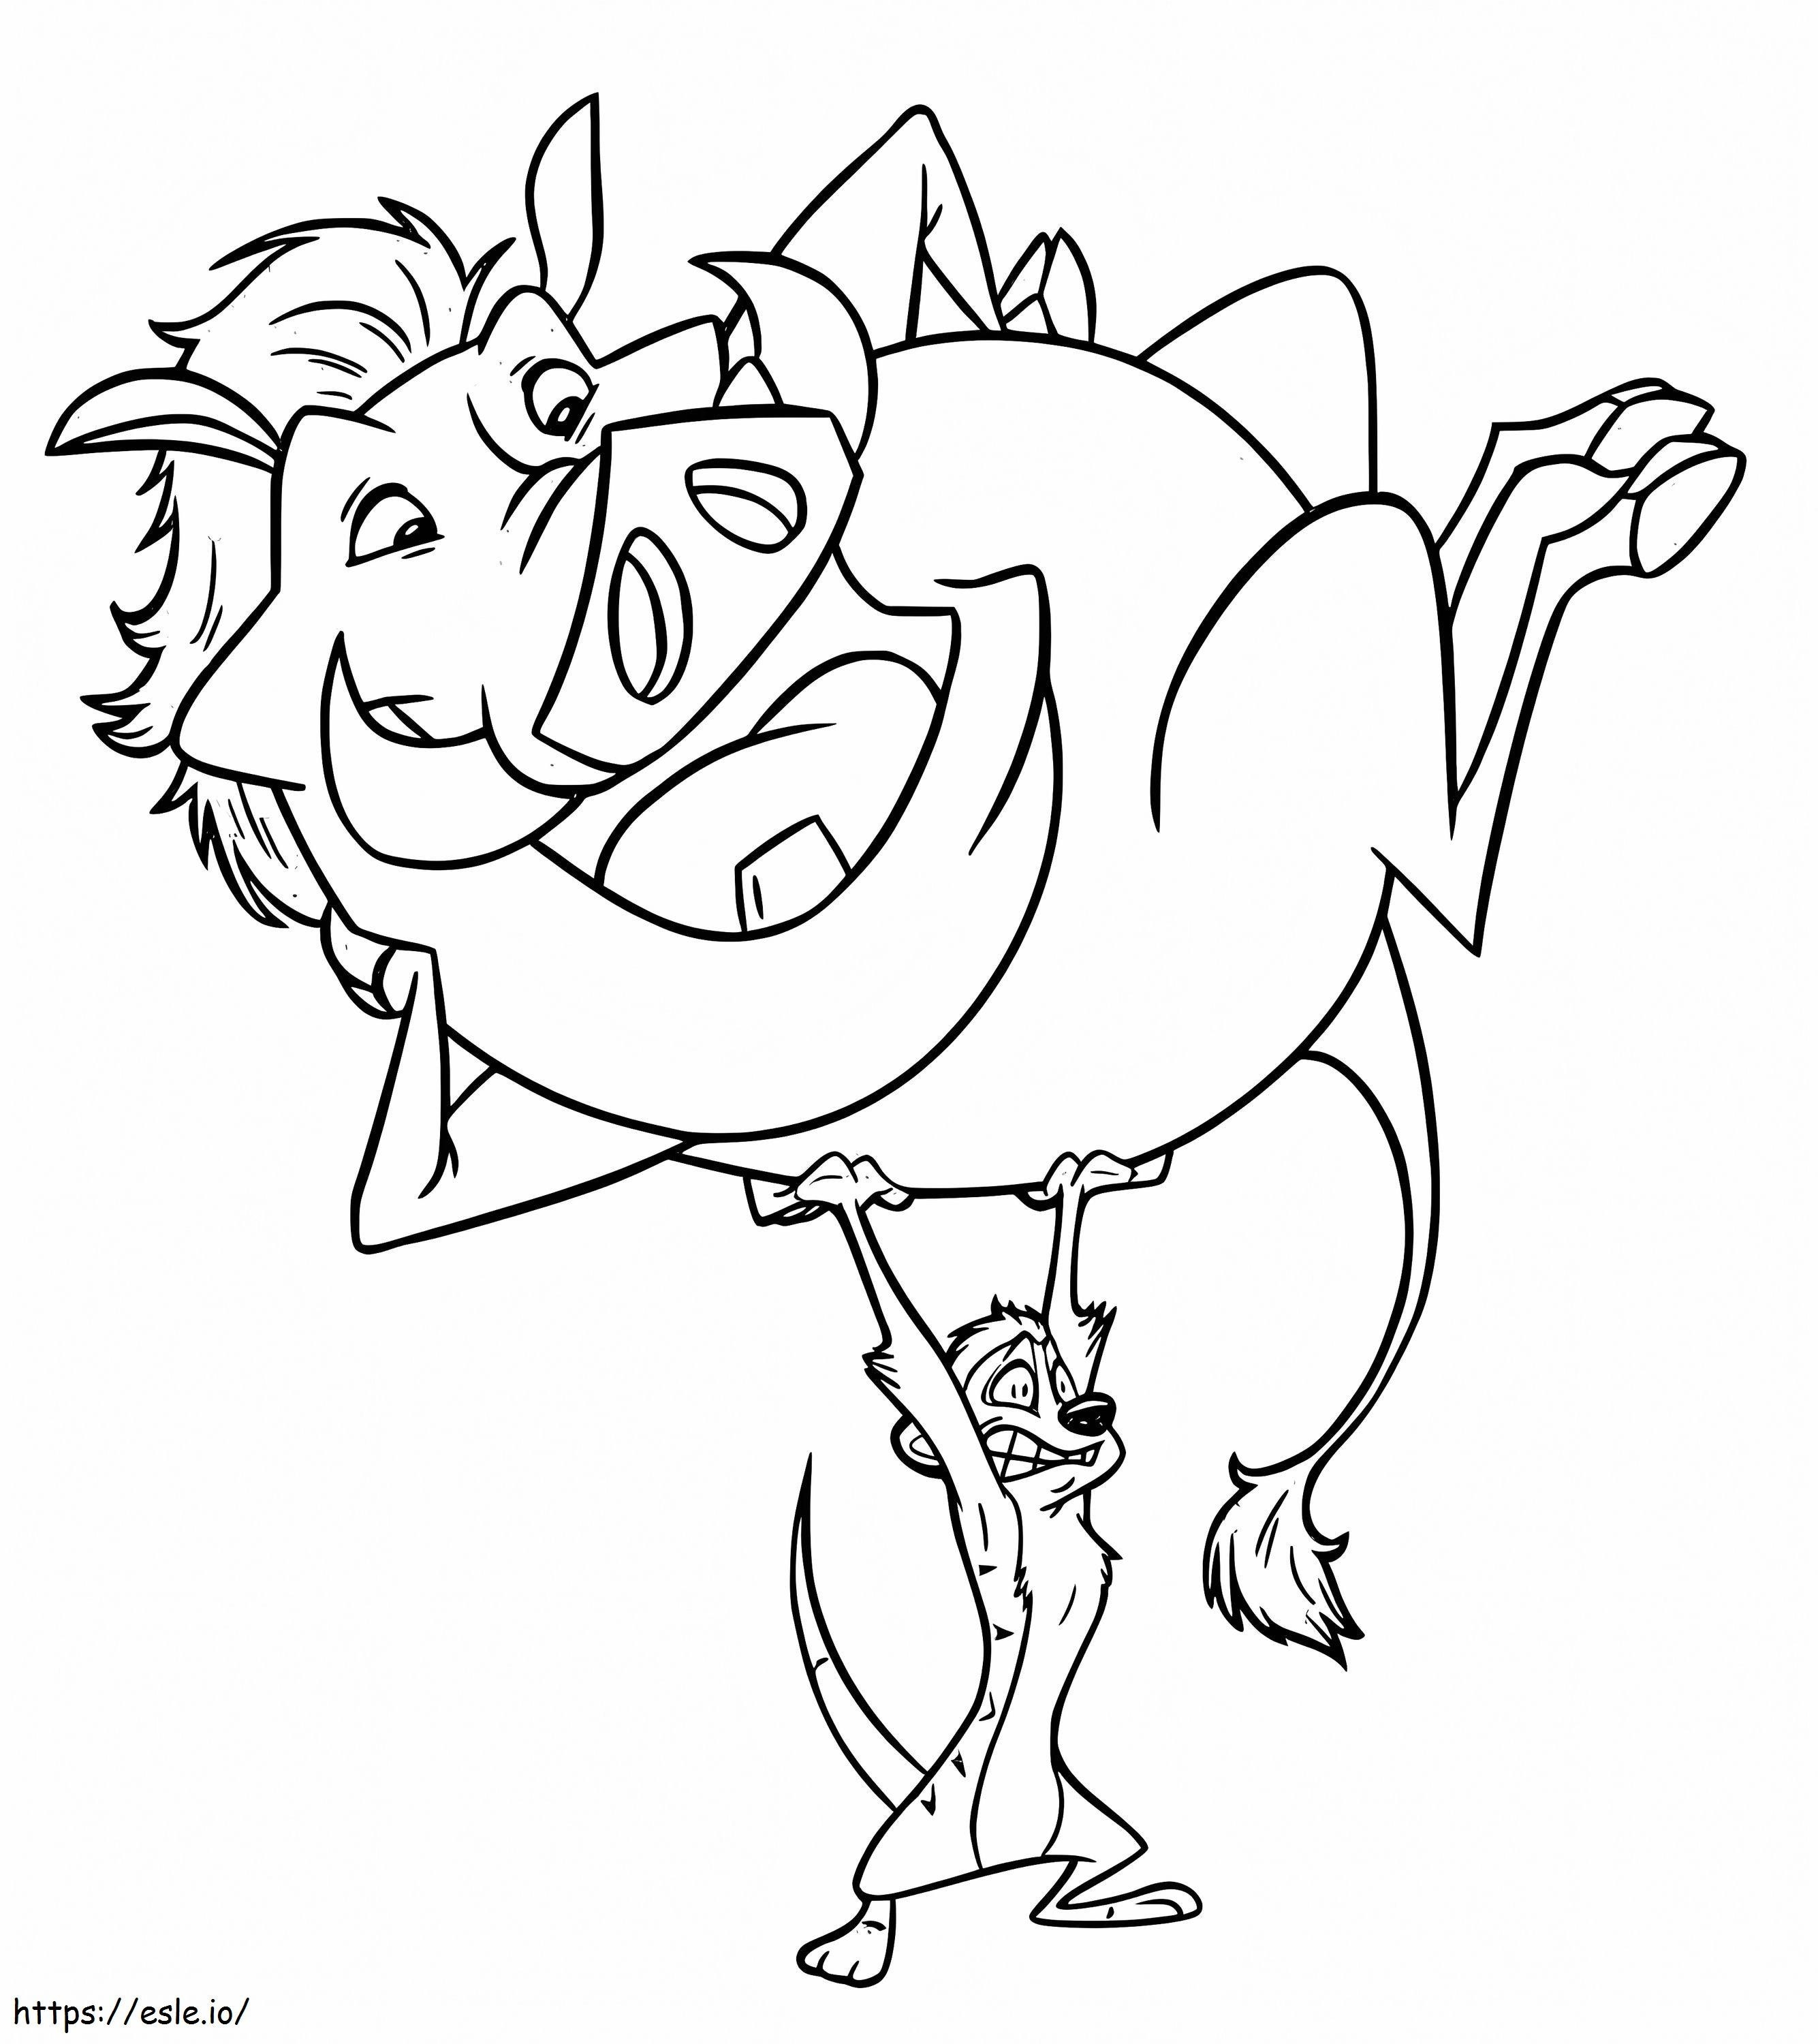 Funny Timon And Pumbaa coloring page